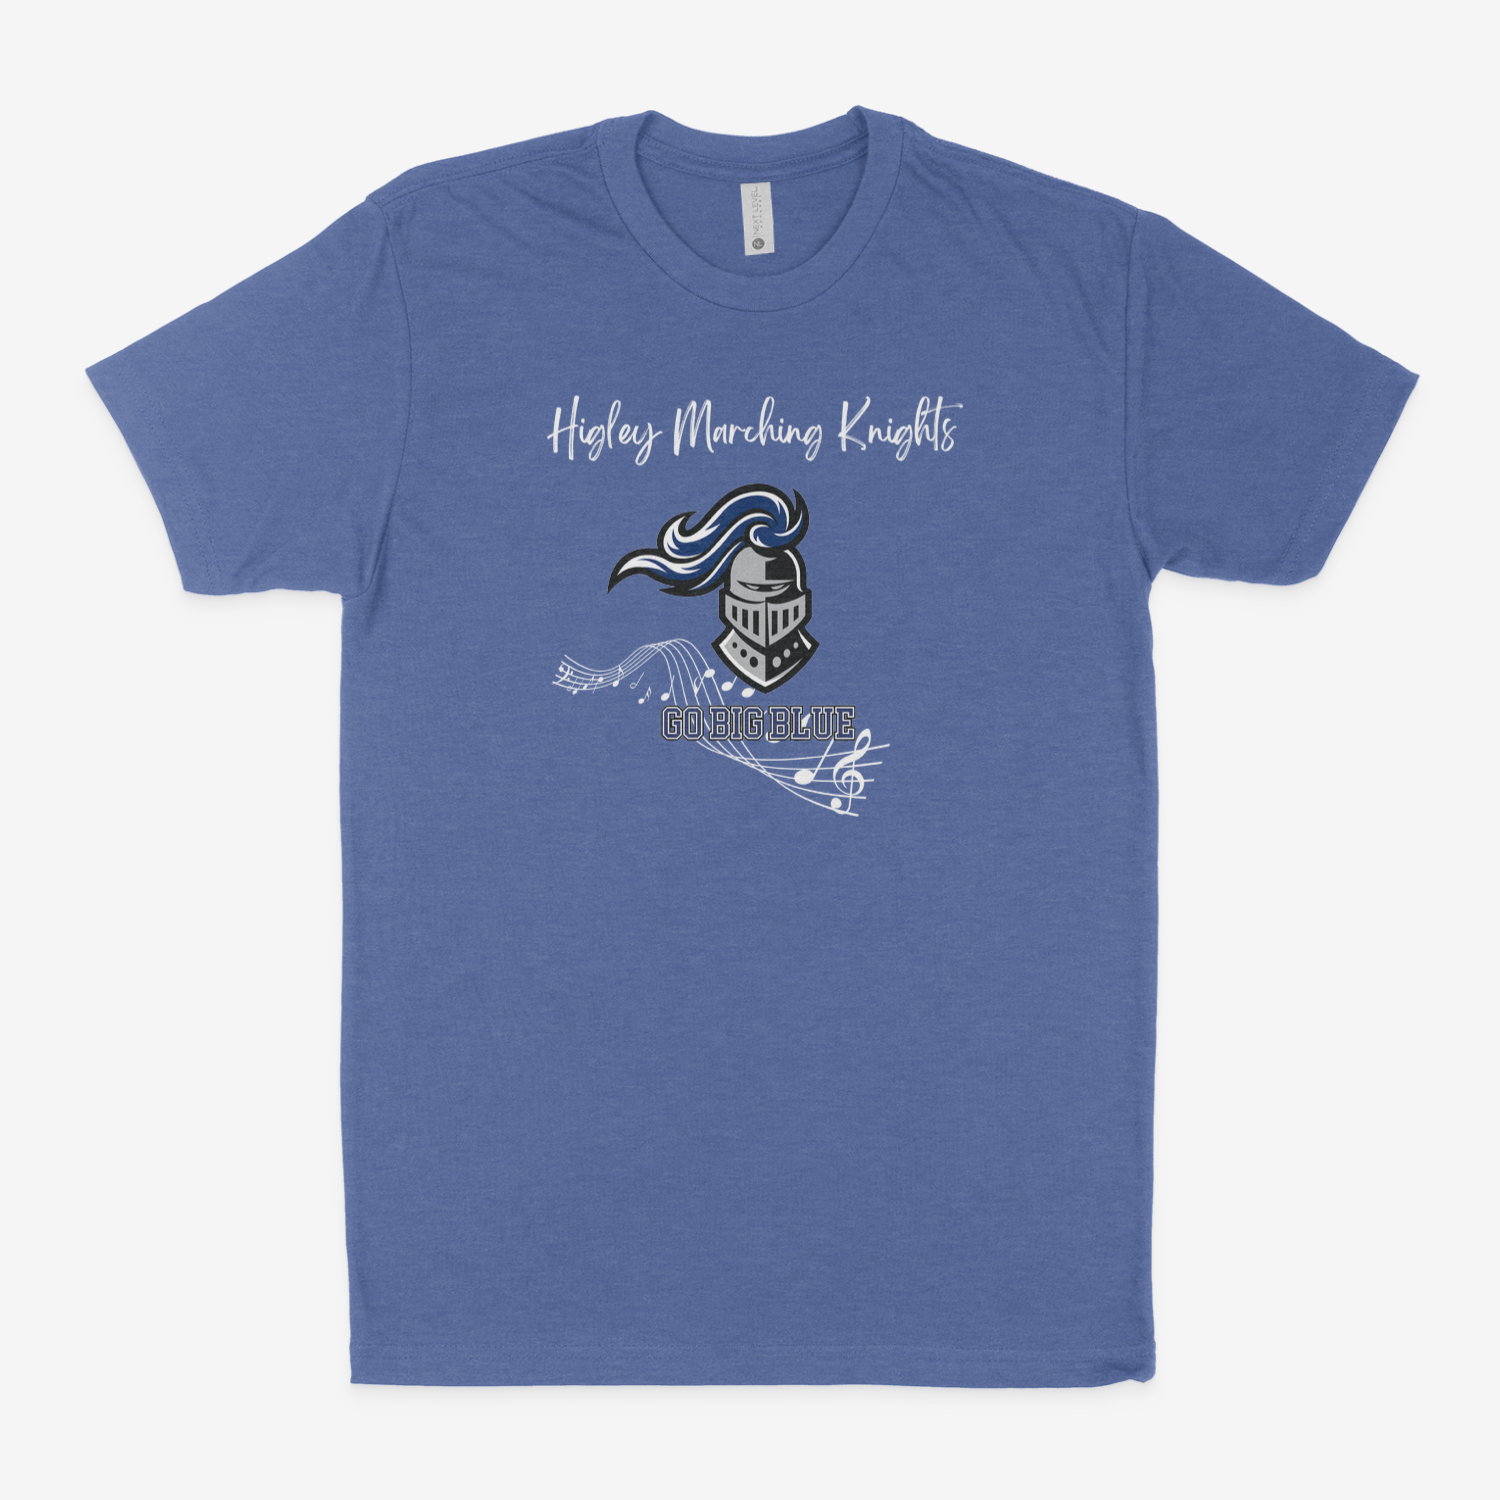 Higley Marching Knights T-Shirt - Student